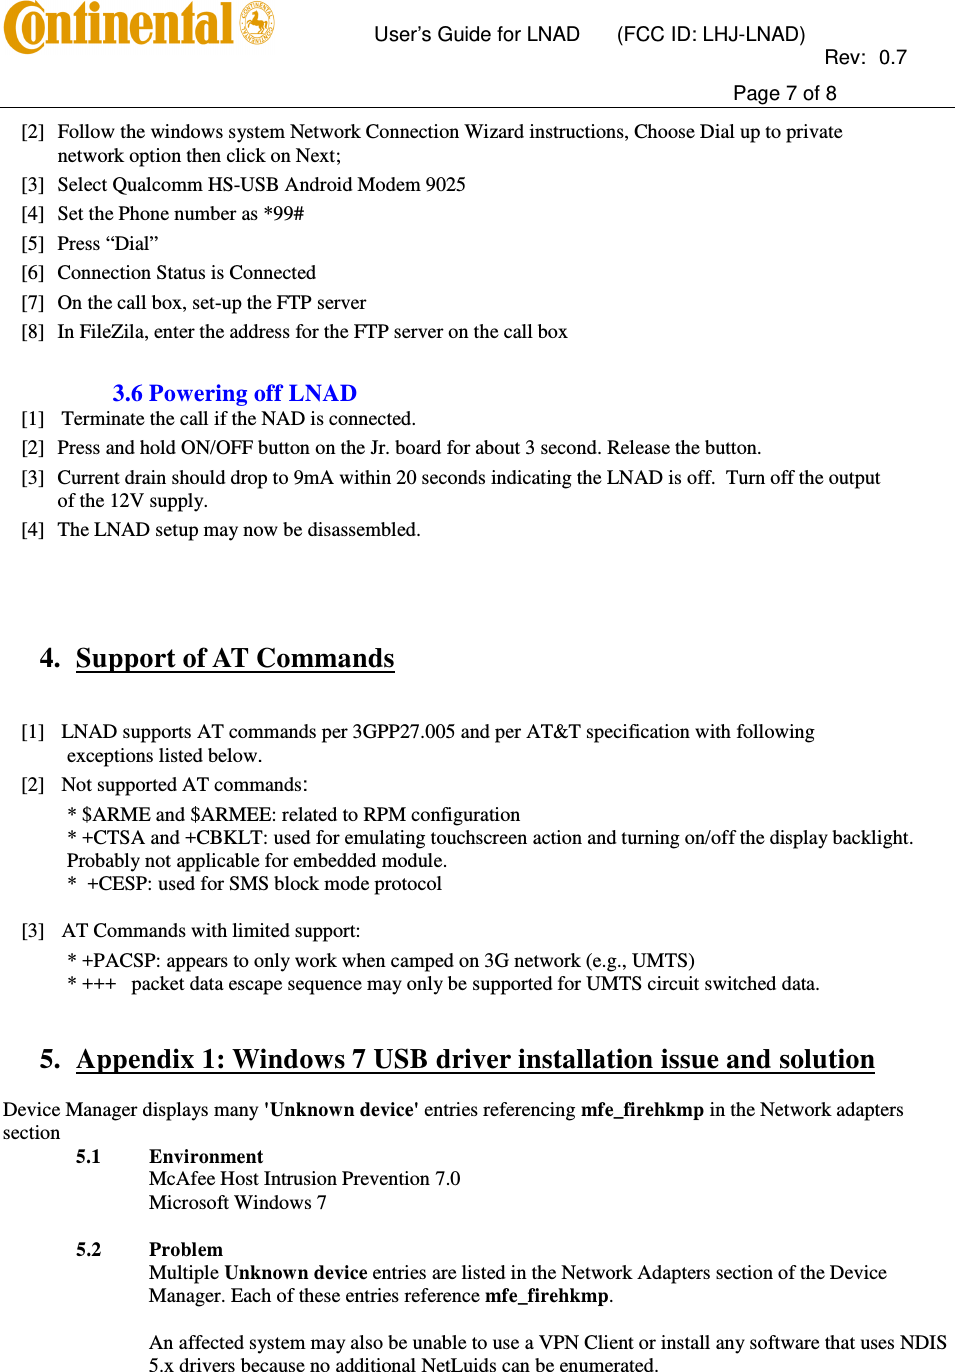       User’s Guide for LNAD  (FCC ID: LHJ-LNAD)          Rev:  0.7     Page 7 of 8  [2] Follow the windows system Network Connection Wizard instructions, Choose Dial up to private network option then click on Next; [3] Select Qualcomm HS-USB Android Modem 9025   [4] Set the Phone number as *99# [5] Press “Dial” [6] Connection Status is Connected [7] On the call box, set-up the FTP server [8] In FileZila, enter the address for the FTP server on the call box  3.6 Powering off LNAD [1] Terminate the call if the NAD is connected. [2] Press and hold ON/OFF button on the Jr. board for about 3 second. Release the button. [3] Current drain should drop to 9mA within 20 seconds indicating the LNAD is off.  Turn off the output of the 12V supply. [4] The LNAD setup may now be disassembled.     4. Support of AT Commands   [1] LNAD supports AT commands per 3GPP27.005 and per AT&amp;T specification with following exceptions listed below. [2] Not supported AT commands: * $ARME and $ARMEE: related to RPM configuration * +CTSA and +CBKLT: used for emulating touchscreen action and turning on/off the display backlight. Probably not applicable for embedded module. *  +CESP: used for SMS block mode protocol  [3] AT Commands with limited support: * +PACSP: appears to only work when camped on 3G network (e.g., UMTS) * +++   packet data escape sequence may only be supported for UMTS circuit switched data.   5. Appendix 1: Windows 7 USB driver installation issue and solution  Device Manager displays many &apos;Unknown device&apos; entries referencing mfe_firehkmp in the Network adapters section   5.1 Environment  McAfee Host Intrusion Prevention 7.0  Microsoft Windows 7  5.2 Problem  Multiple Unknown device entries are listed in the Network Adapters section of the Device Manager. Each of these entries reference mfe_firehkmp.  An affected system may also be unable to use a VPN Client or install any software that uses NDIS 5.x drivers because no additional NetLuids can be enumerated.  